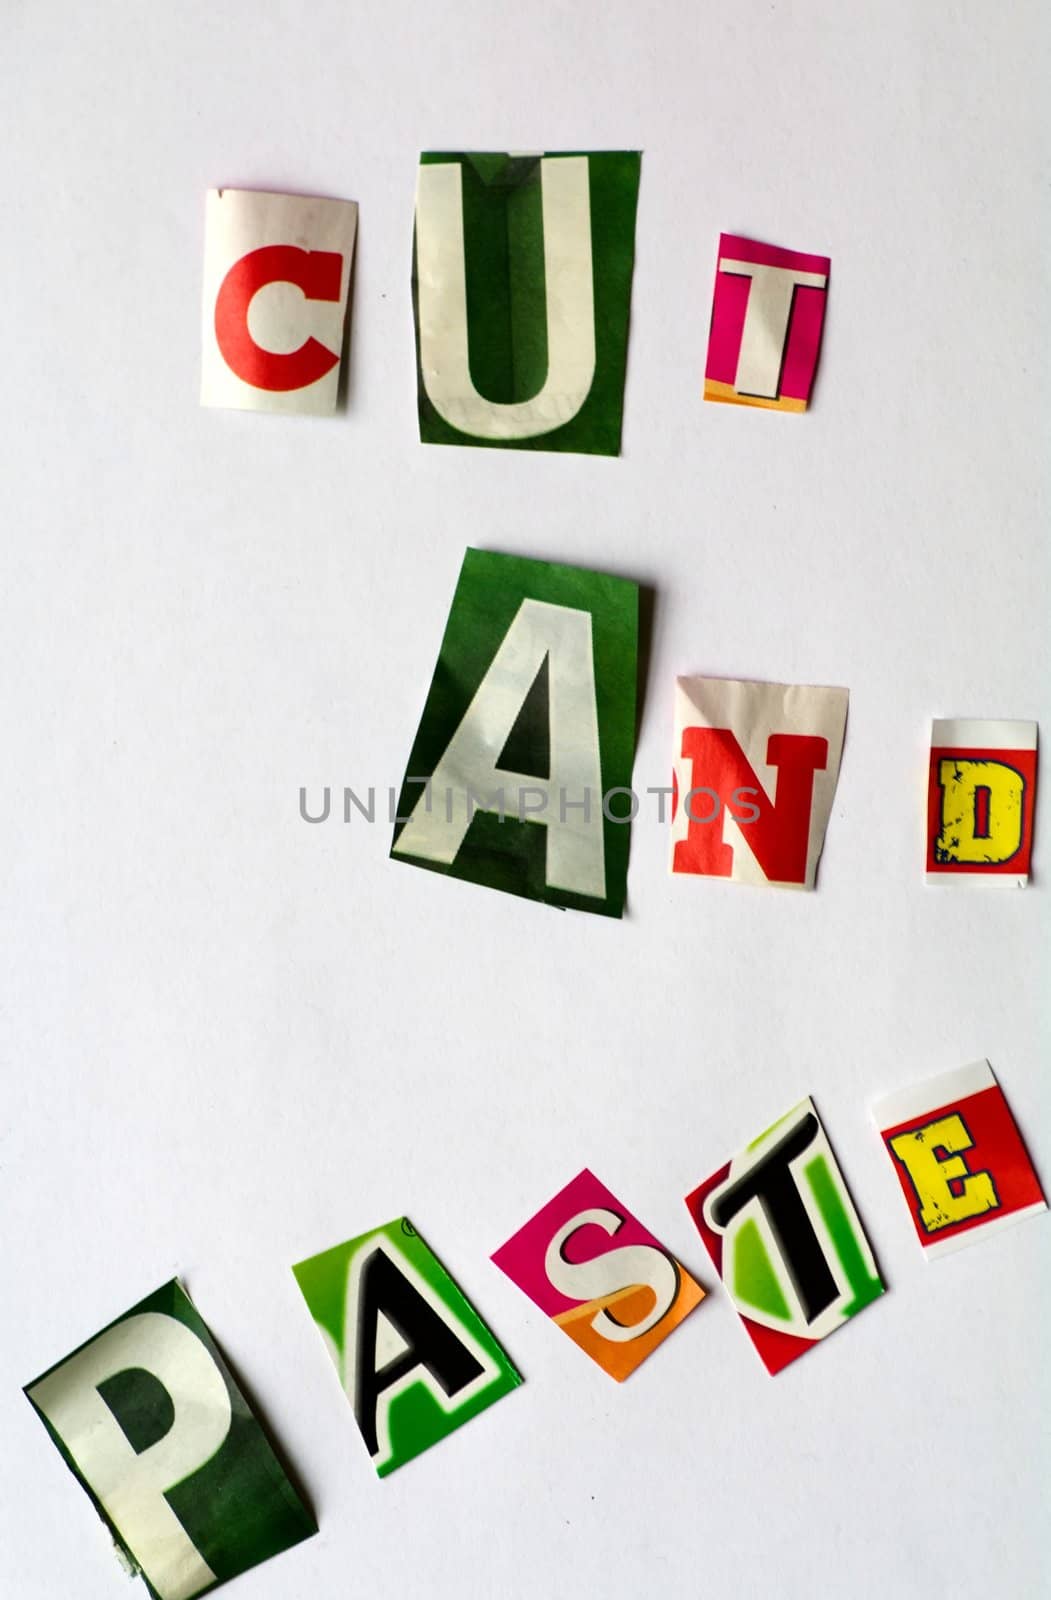 Cut and paste illustrated with letters cut from different newspapers